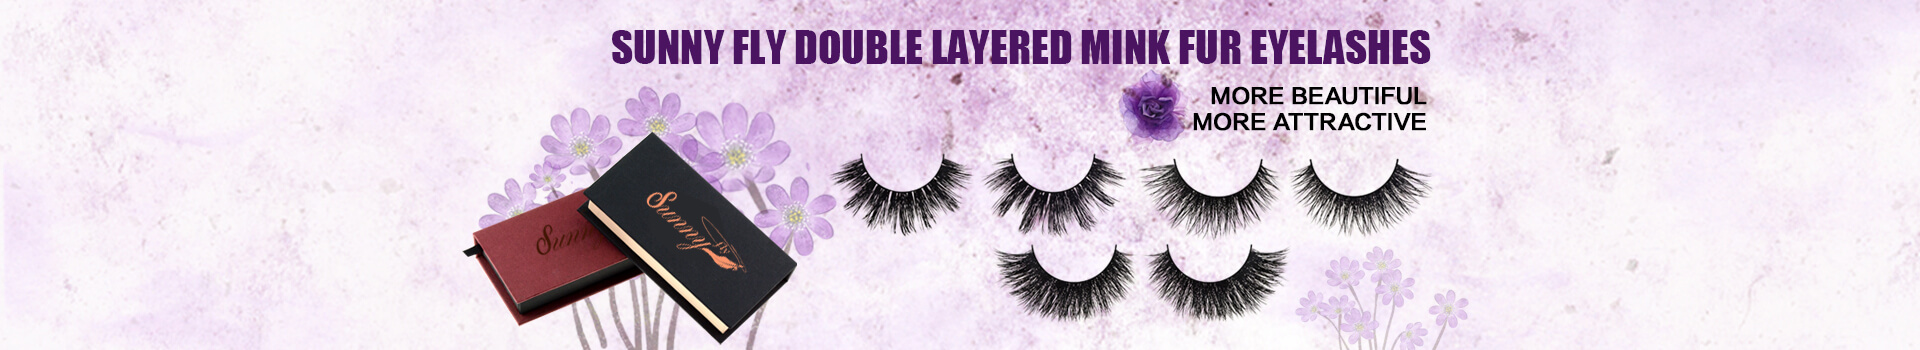 Double Layered Nerz Wimpern MD02